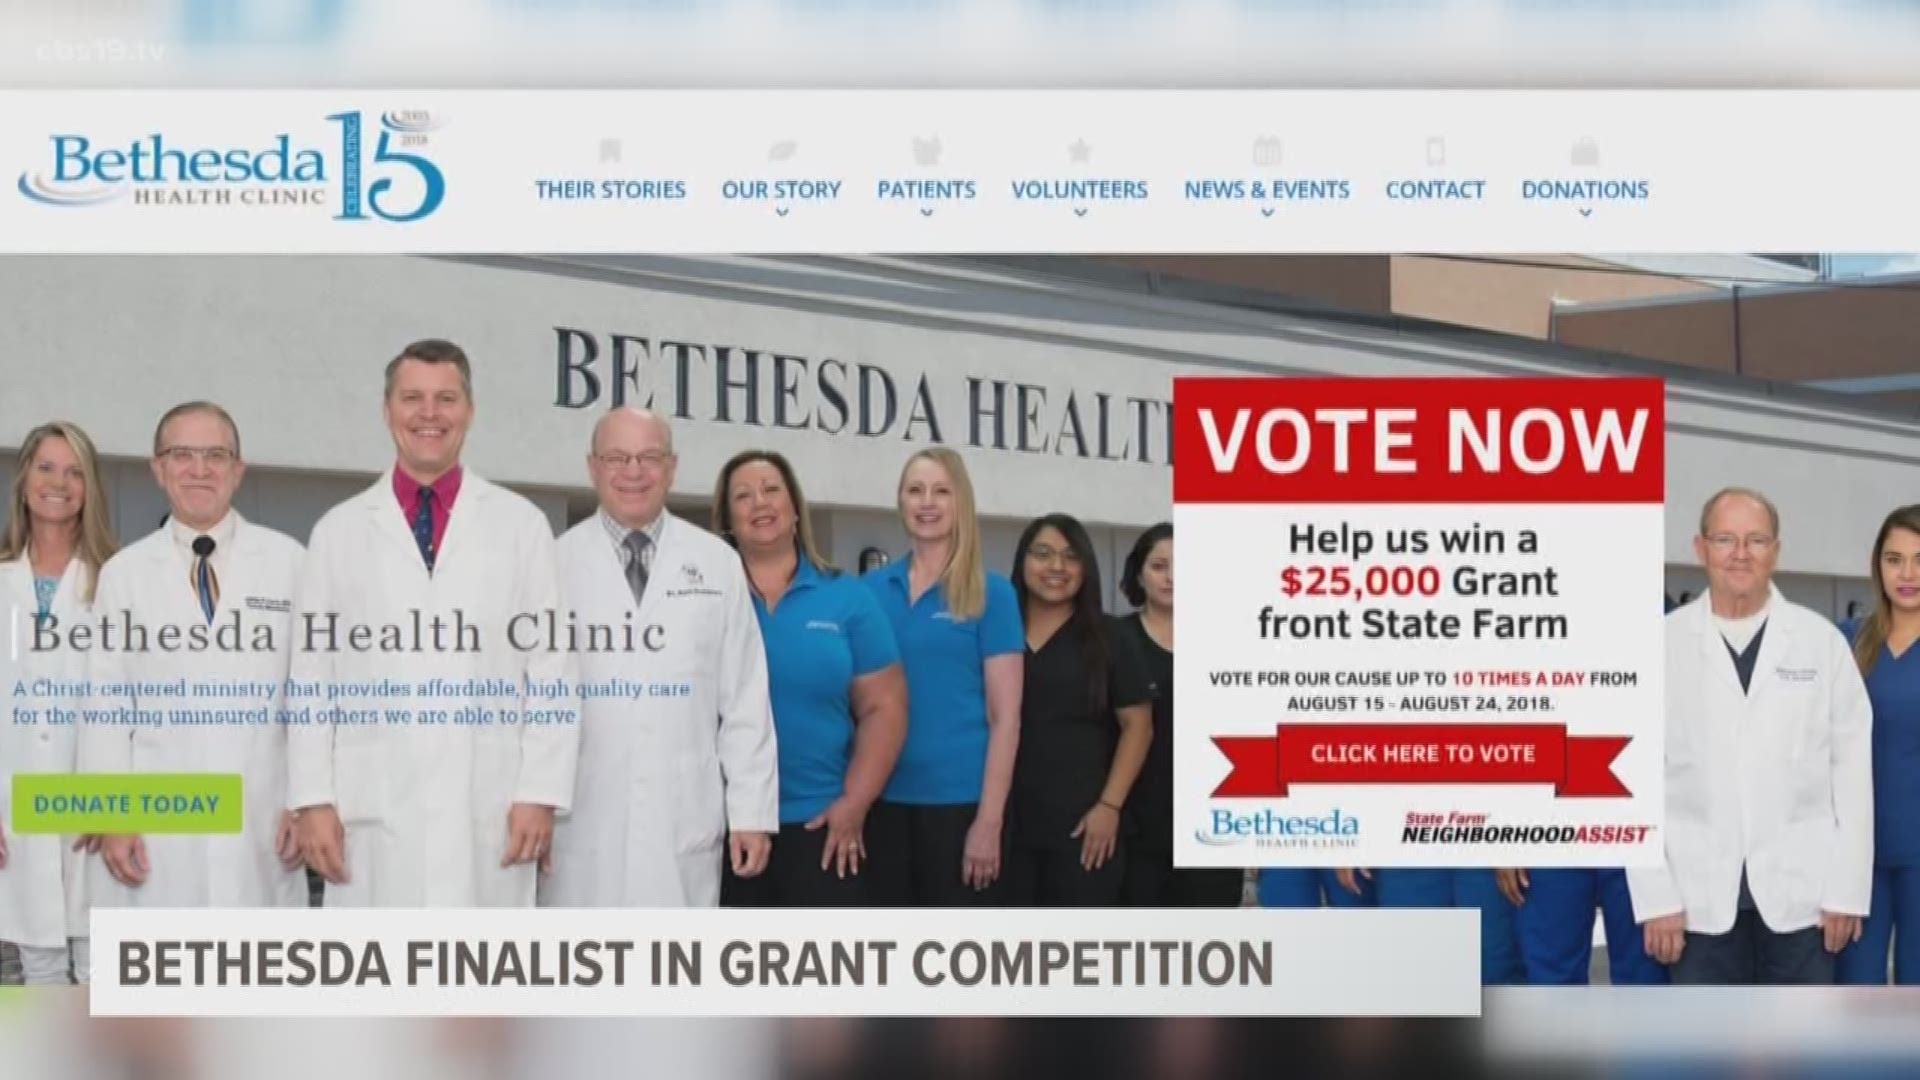 Bethesda Health Clinic is in the top 200 finalist for the State Farm, Neighborhood Assist grant.